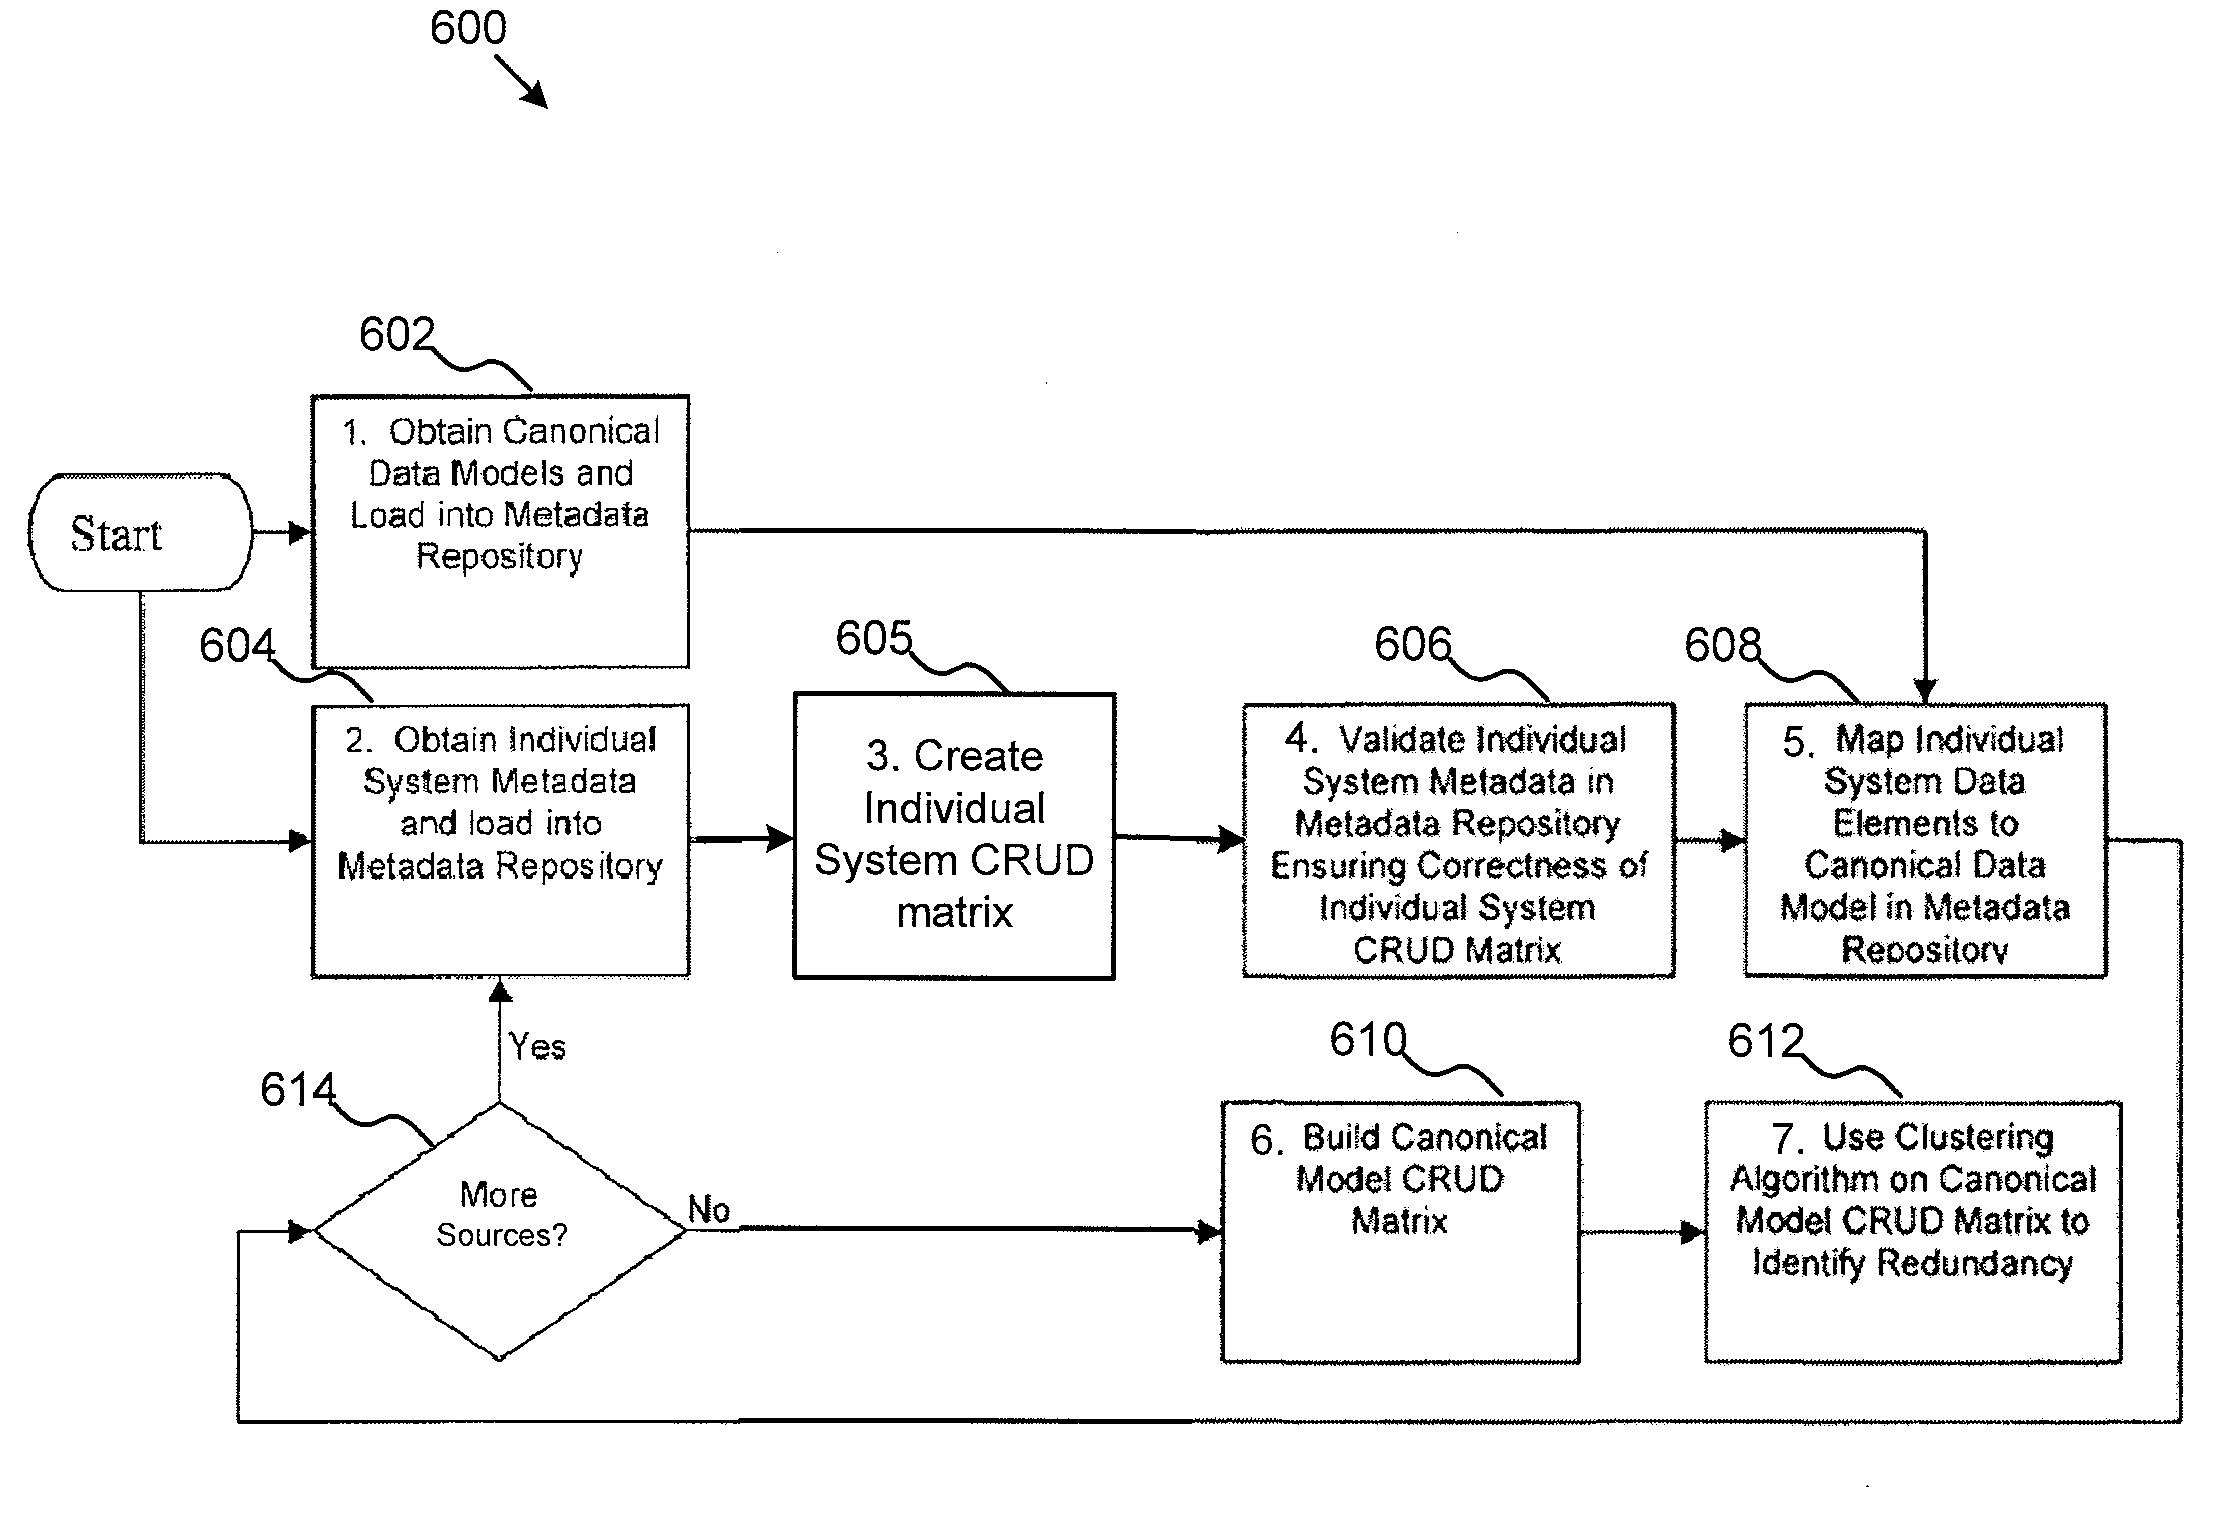 Apparatus, System, and Method for Identifying Redundancy and Consolidation Opportunities in Databases and Application Systems